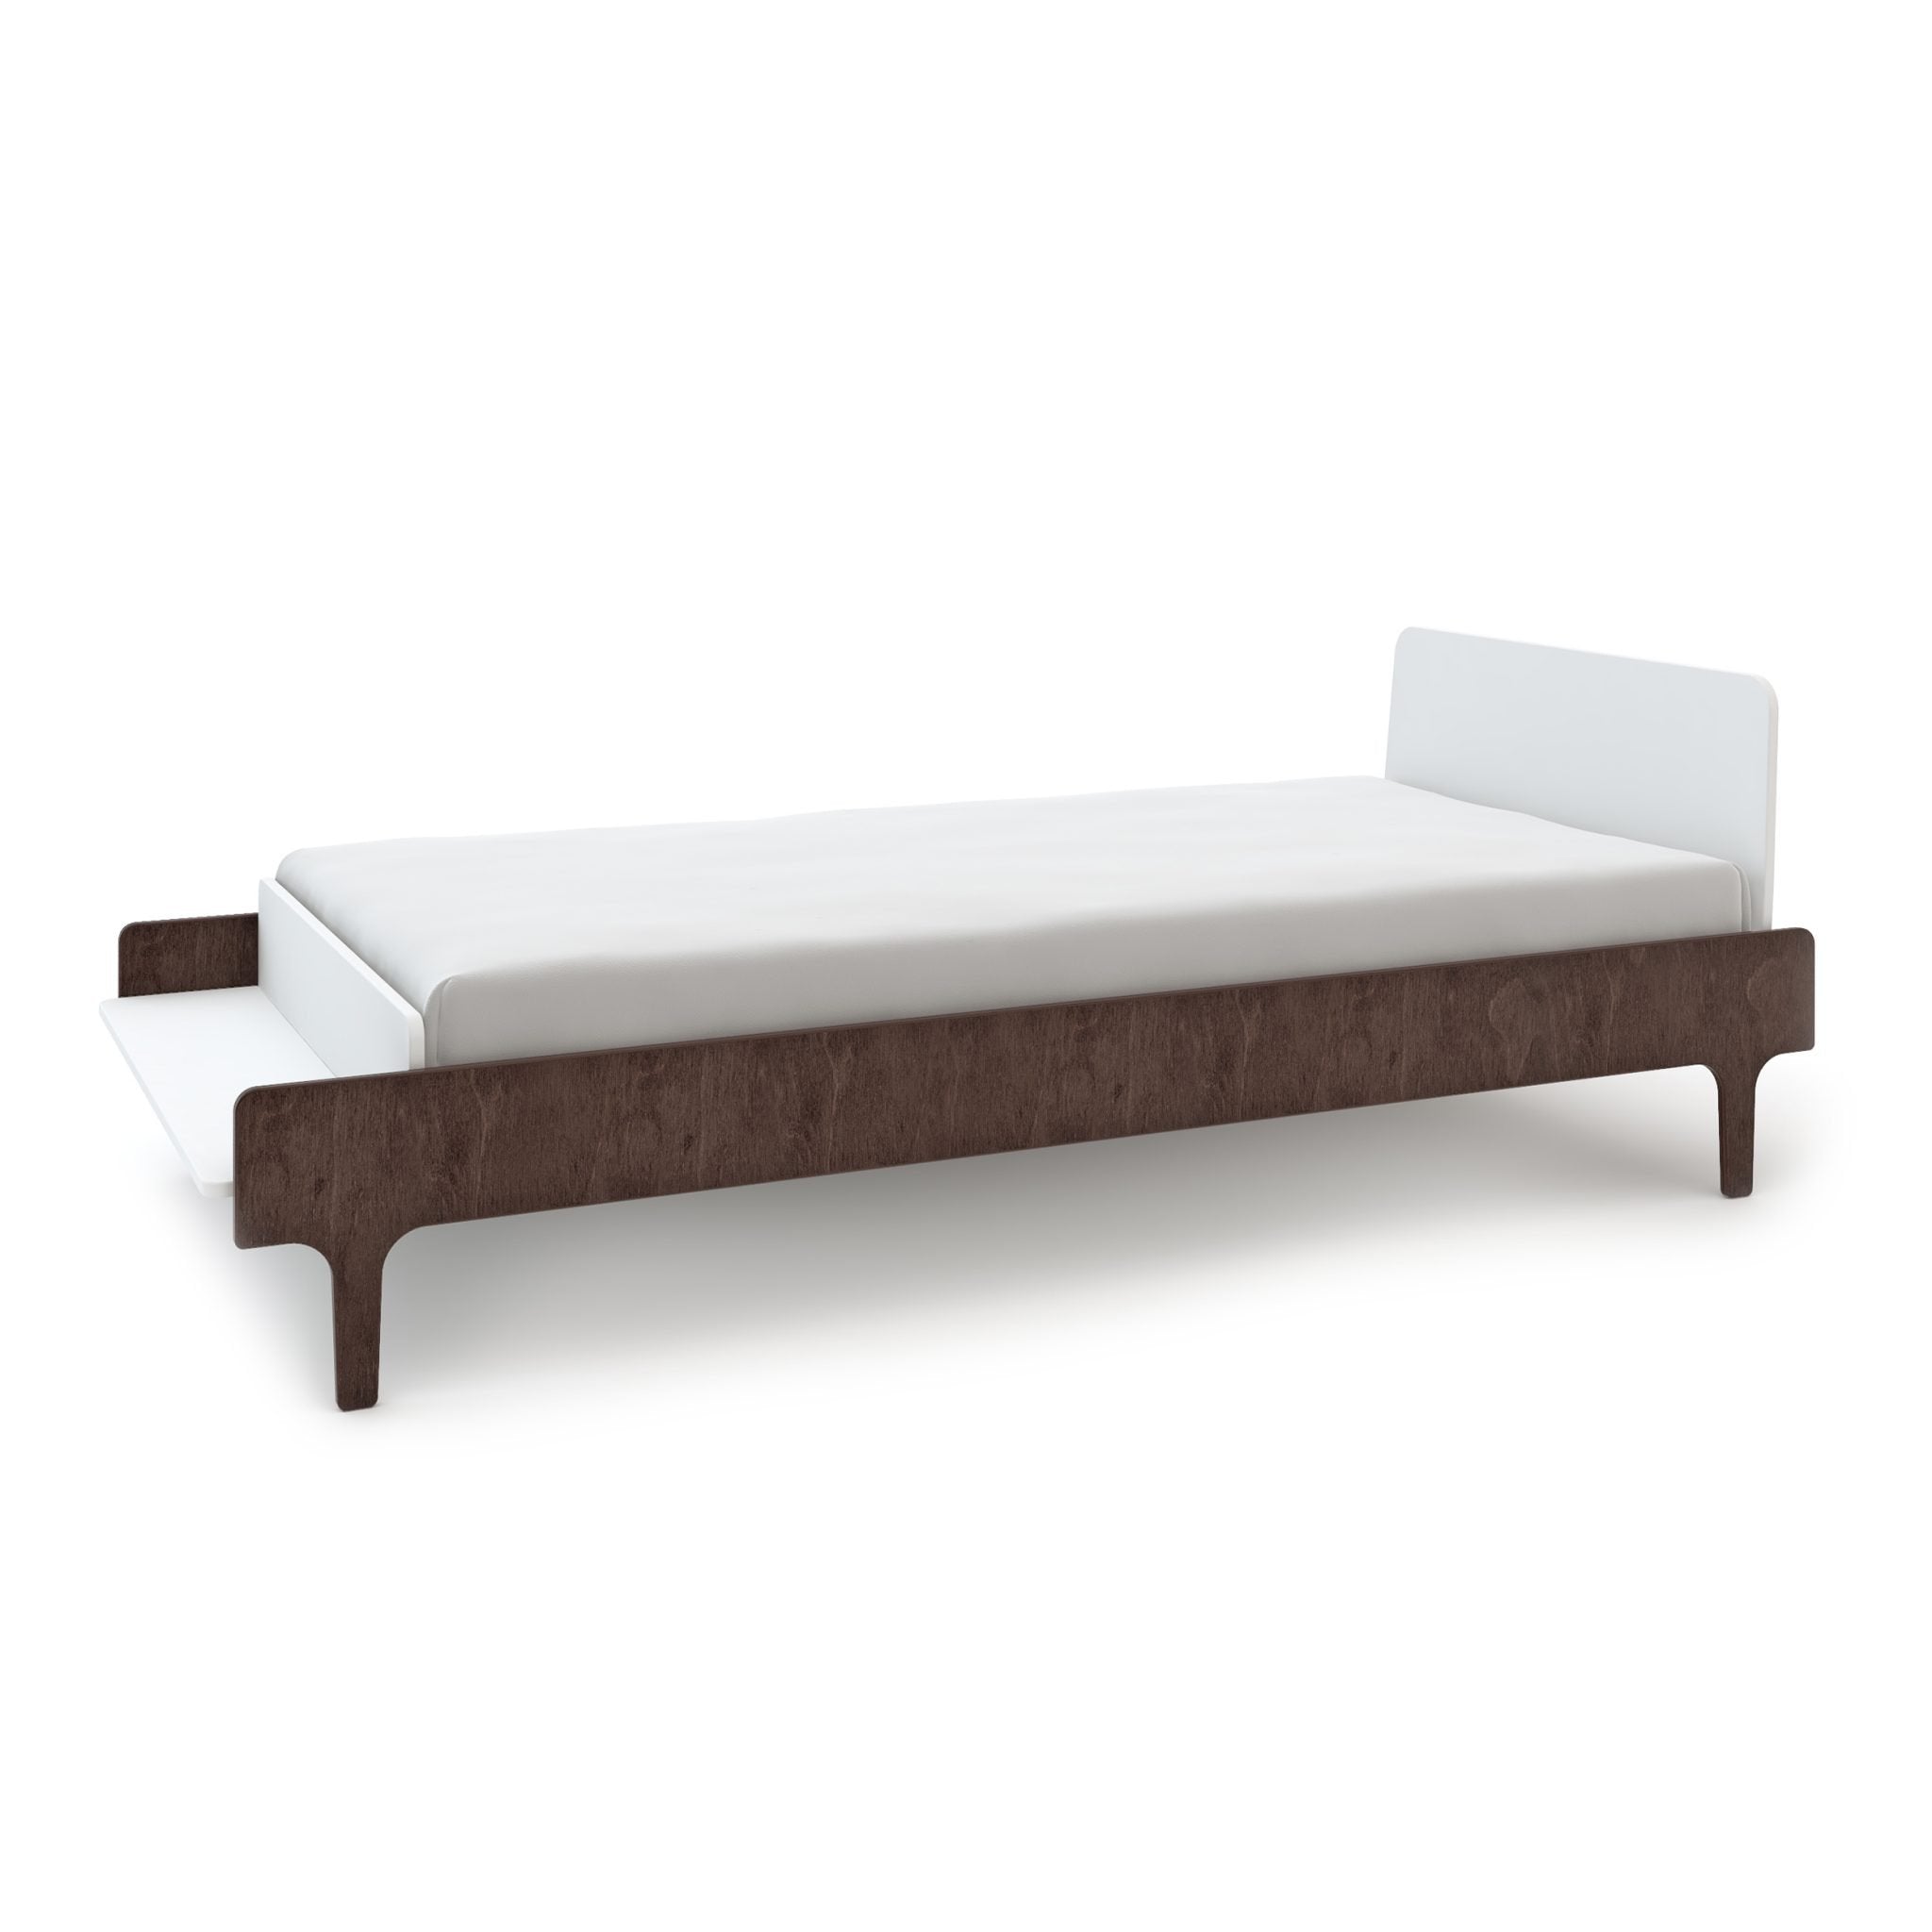 Oeuf River Single Bed in White & Walnut